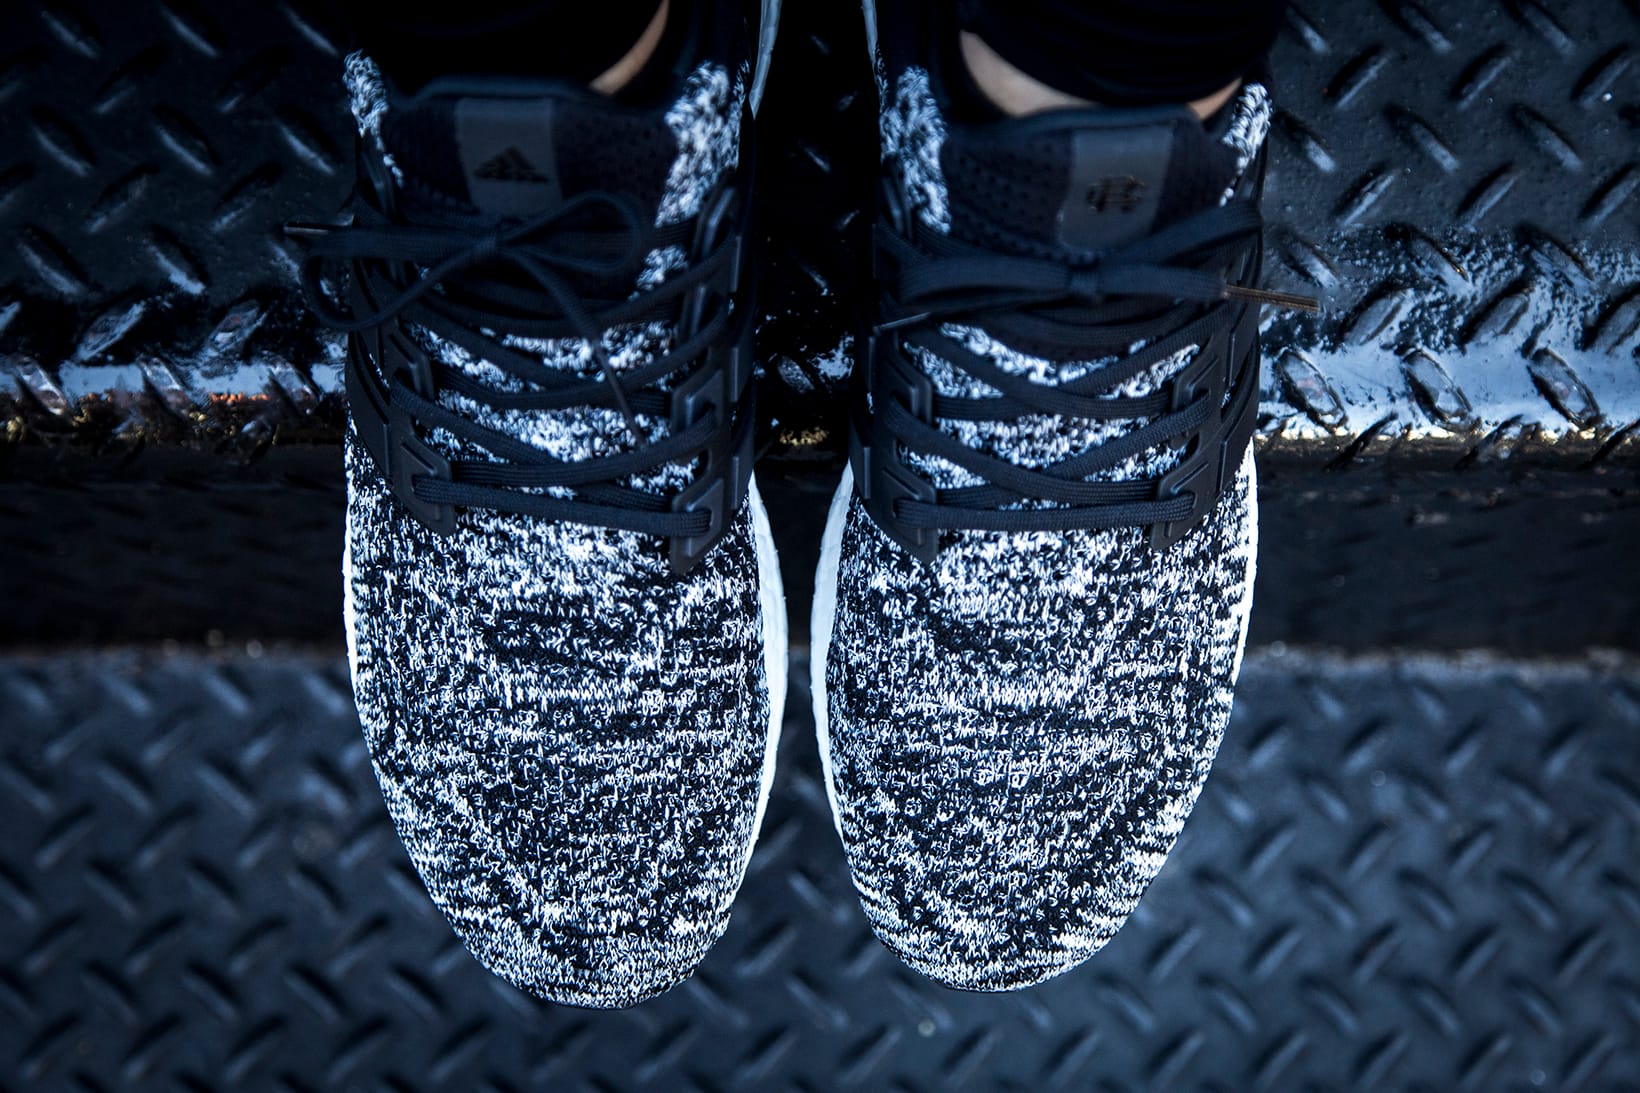 adidas ultra boost reigning champ